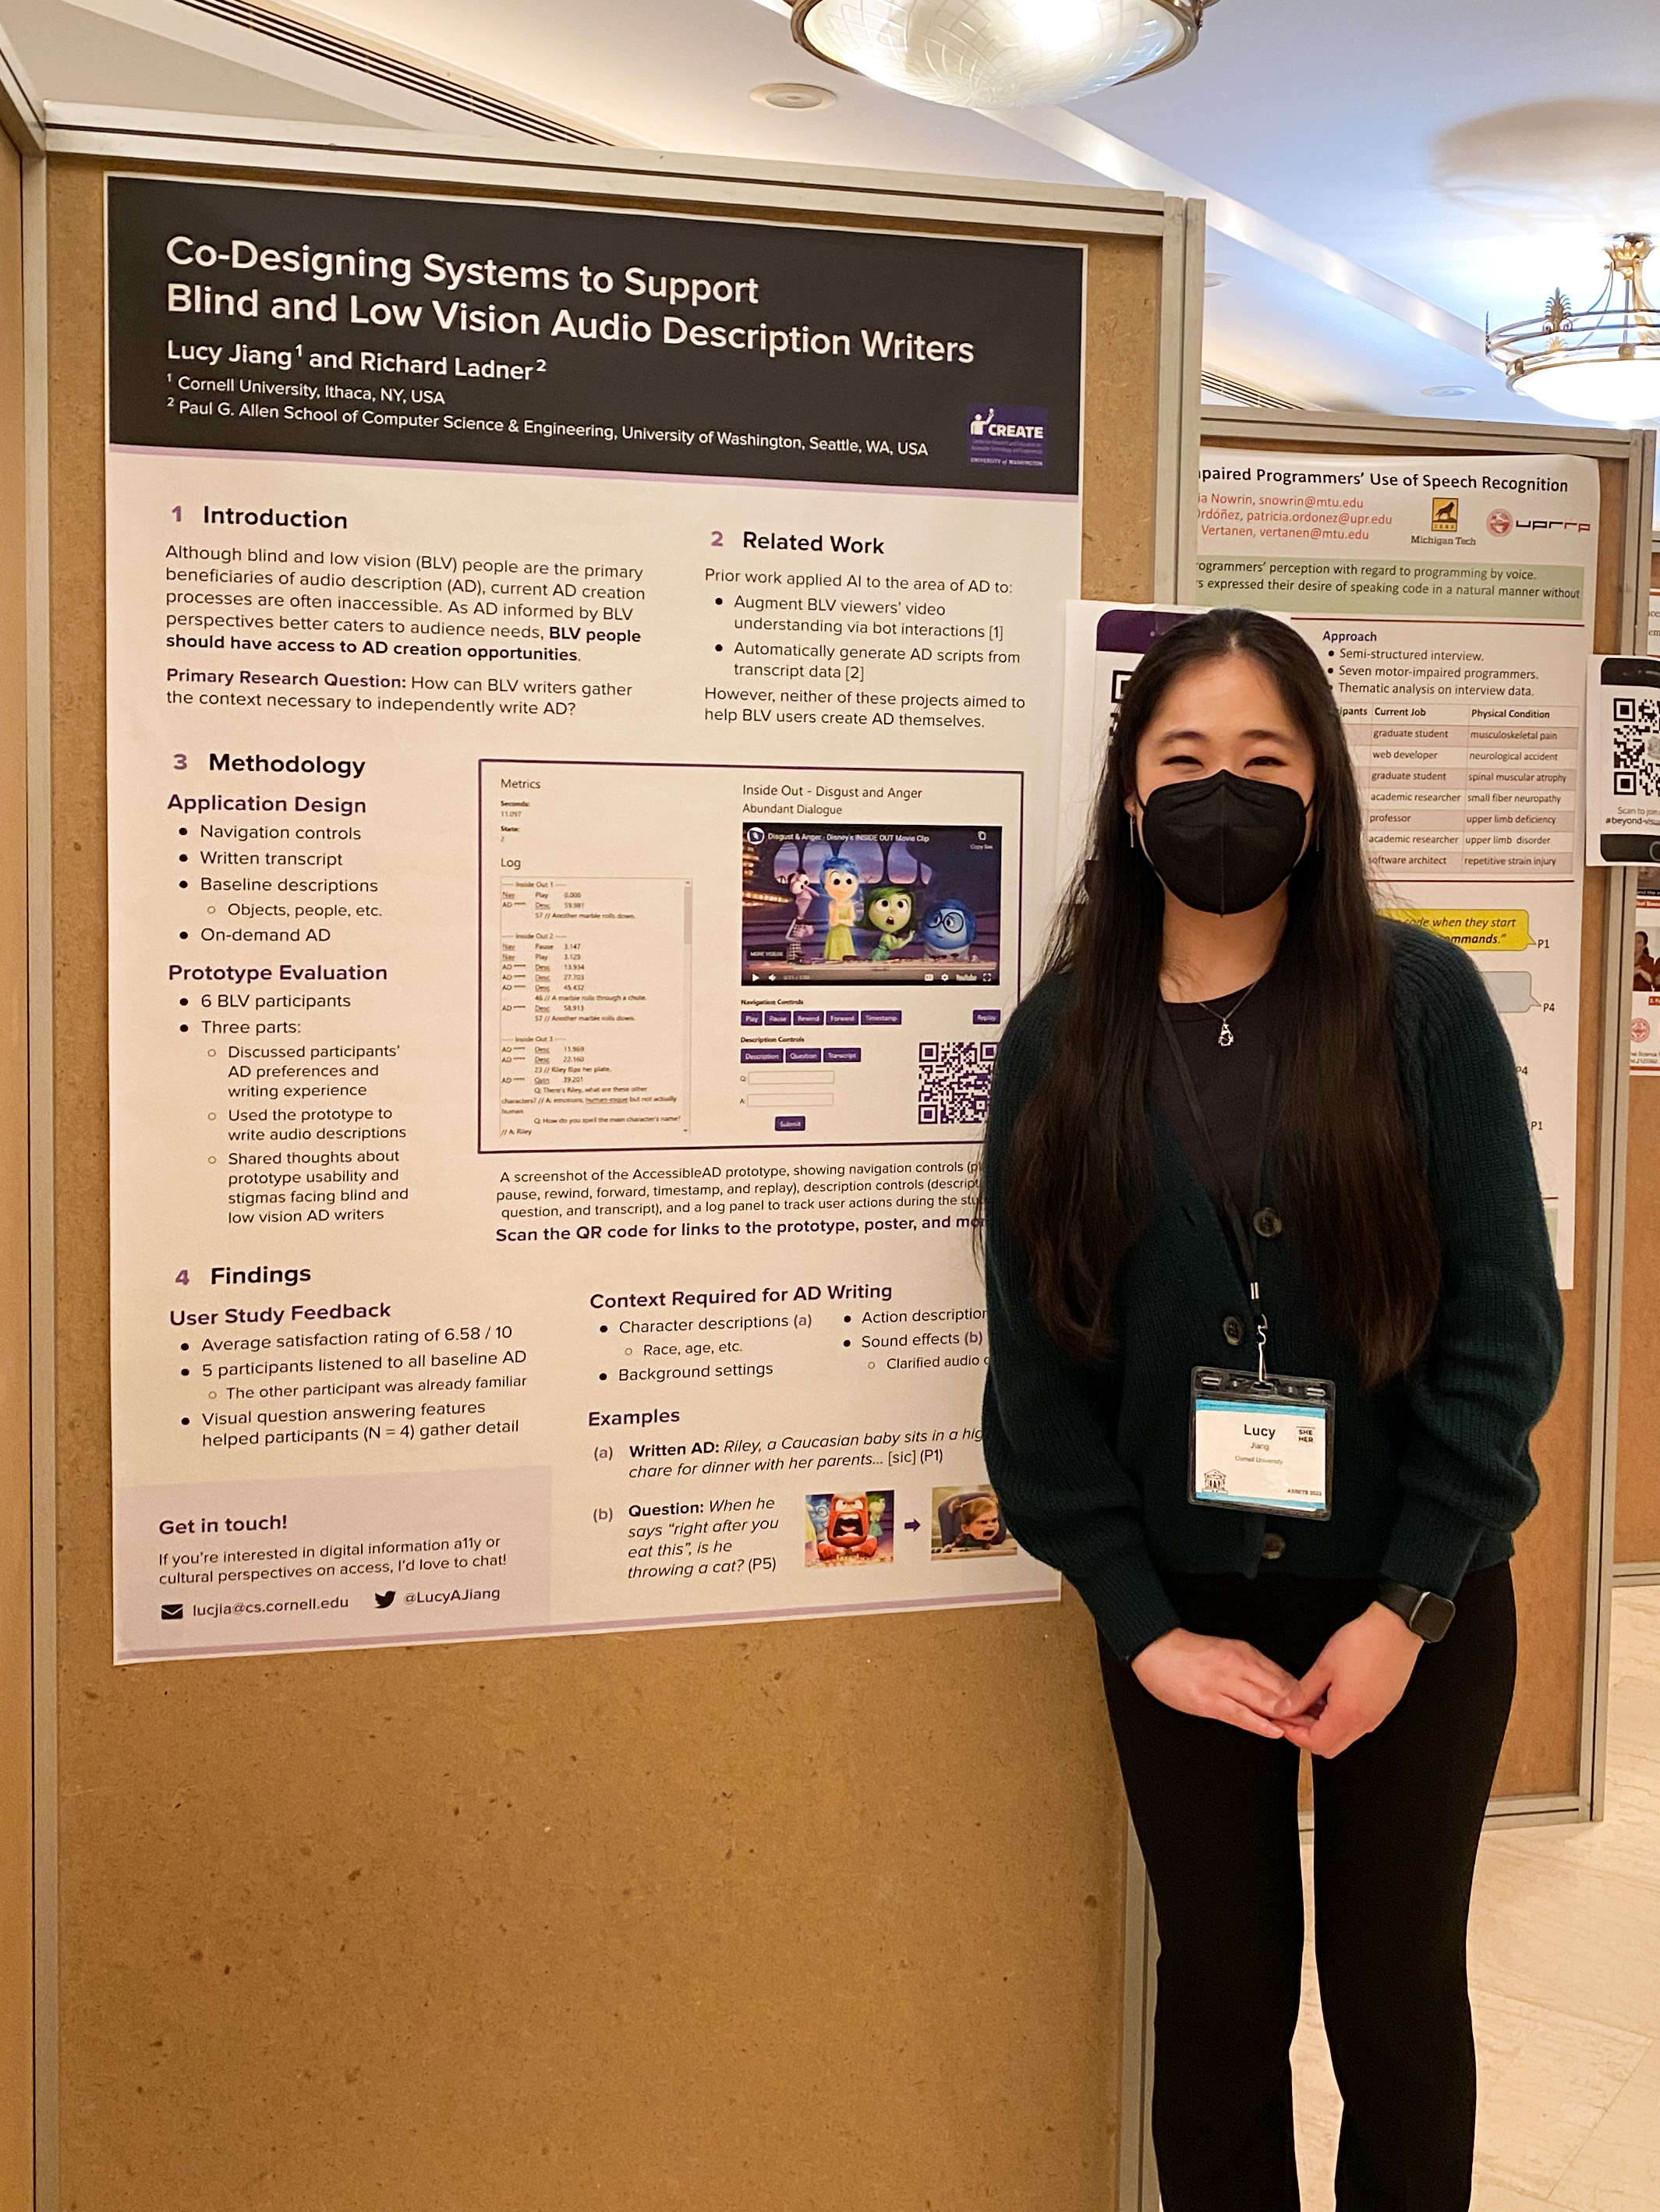 Lucy is smiling and wearing a dark green sweater, black dress pants, a silver penguin necklace, and a black face mask. She stands to the right of her ASSETS poster, which is taped on the wall.